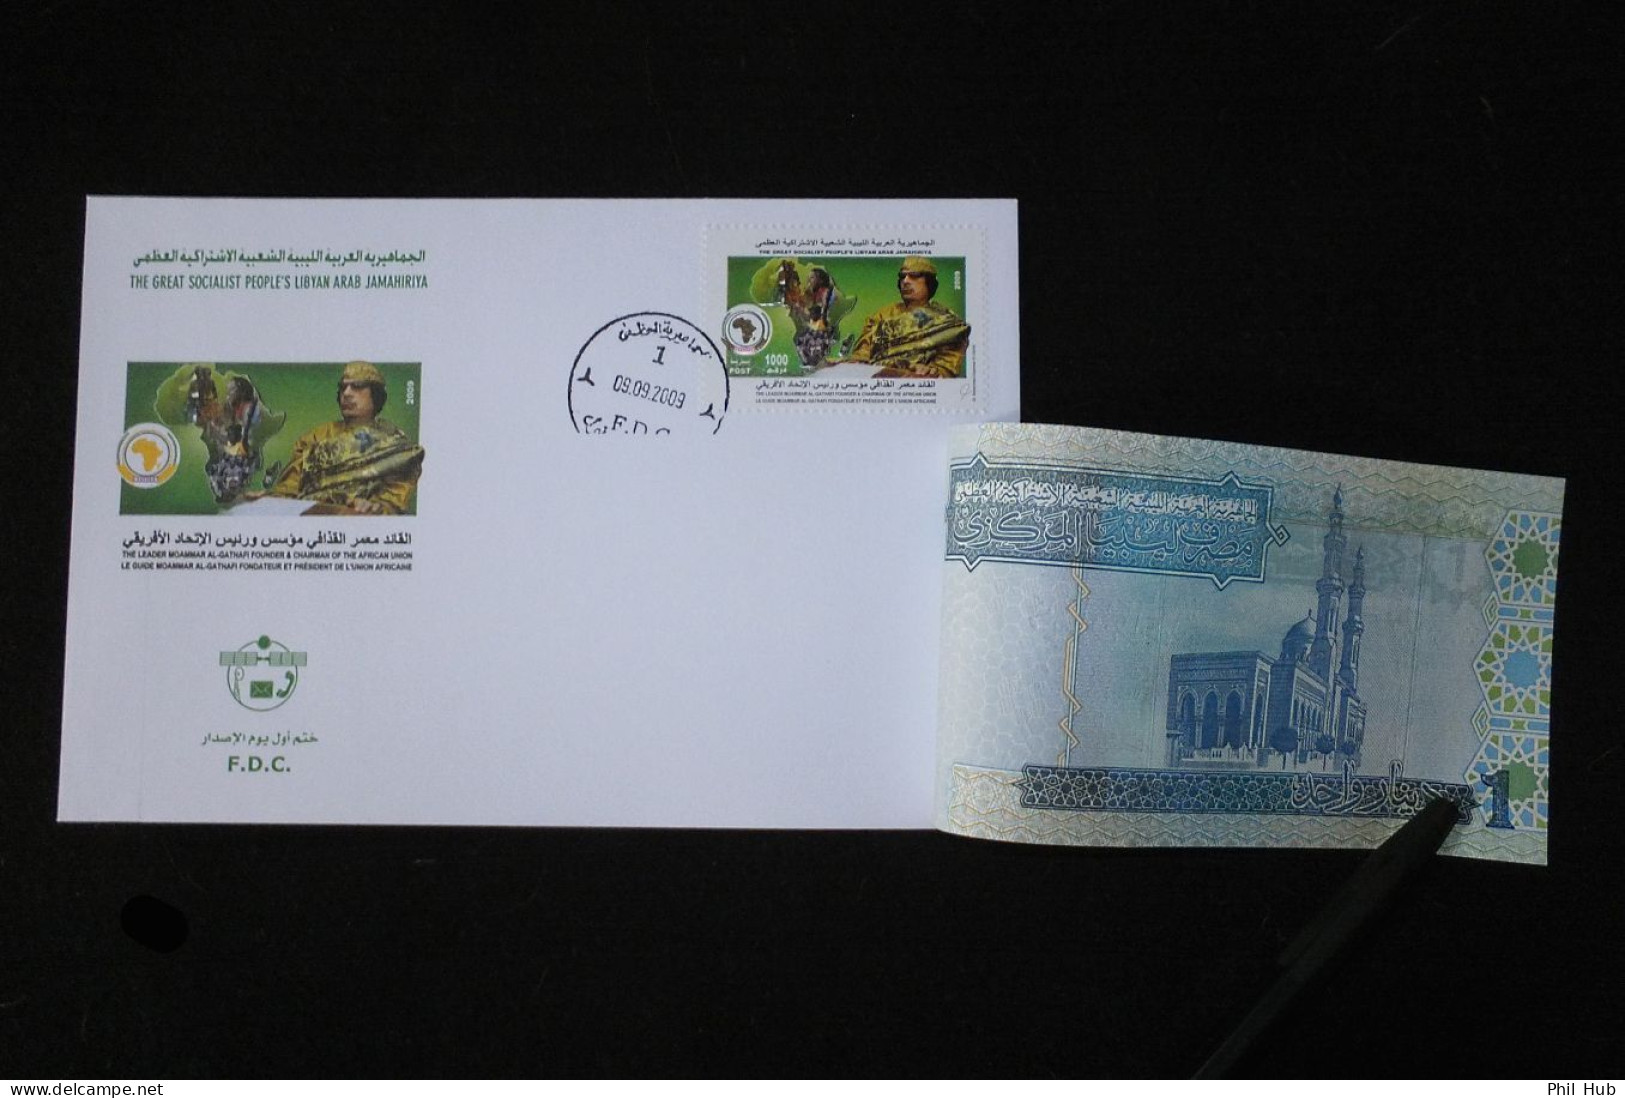 LIBYA 2009 "Gaddafi Africa Union Leader FDC" STAMP And BANKNOTE On FDC - Libia